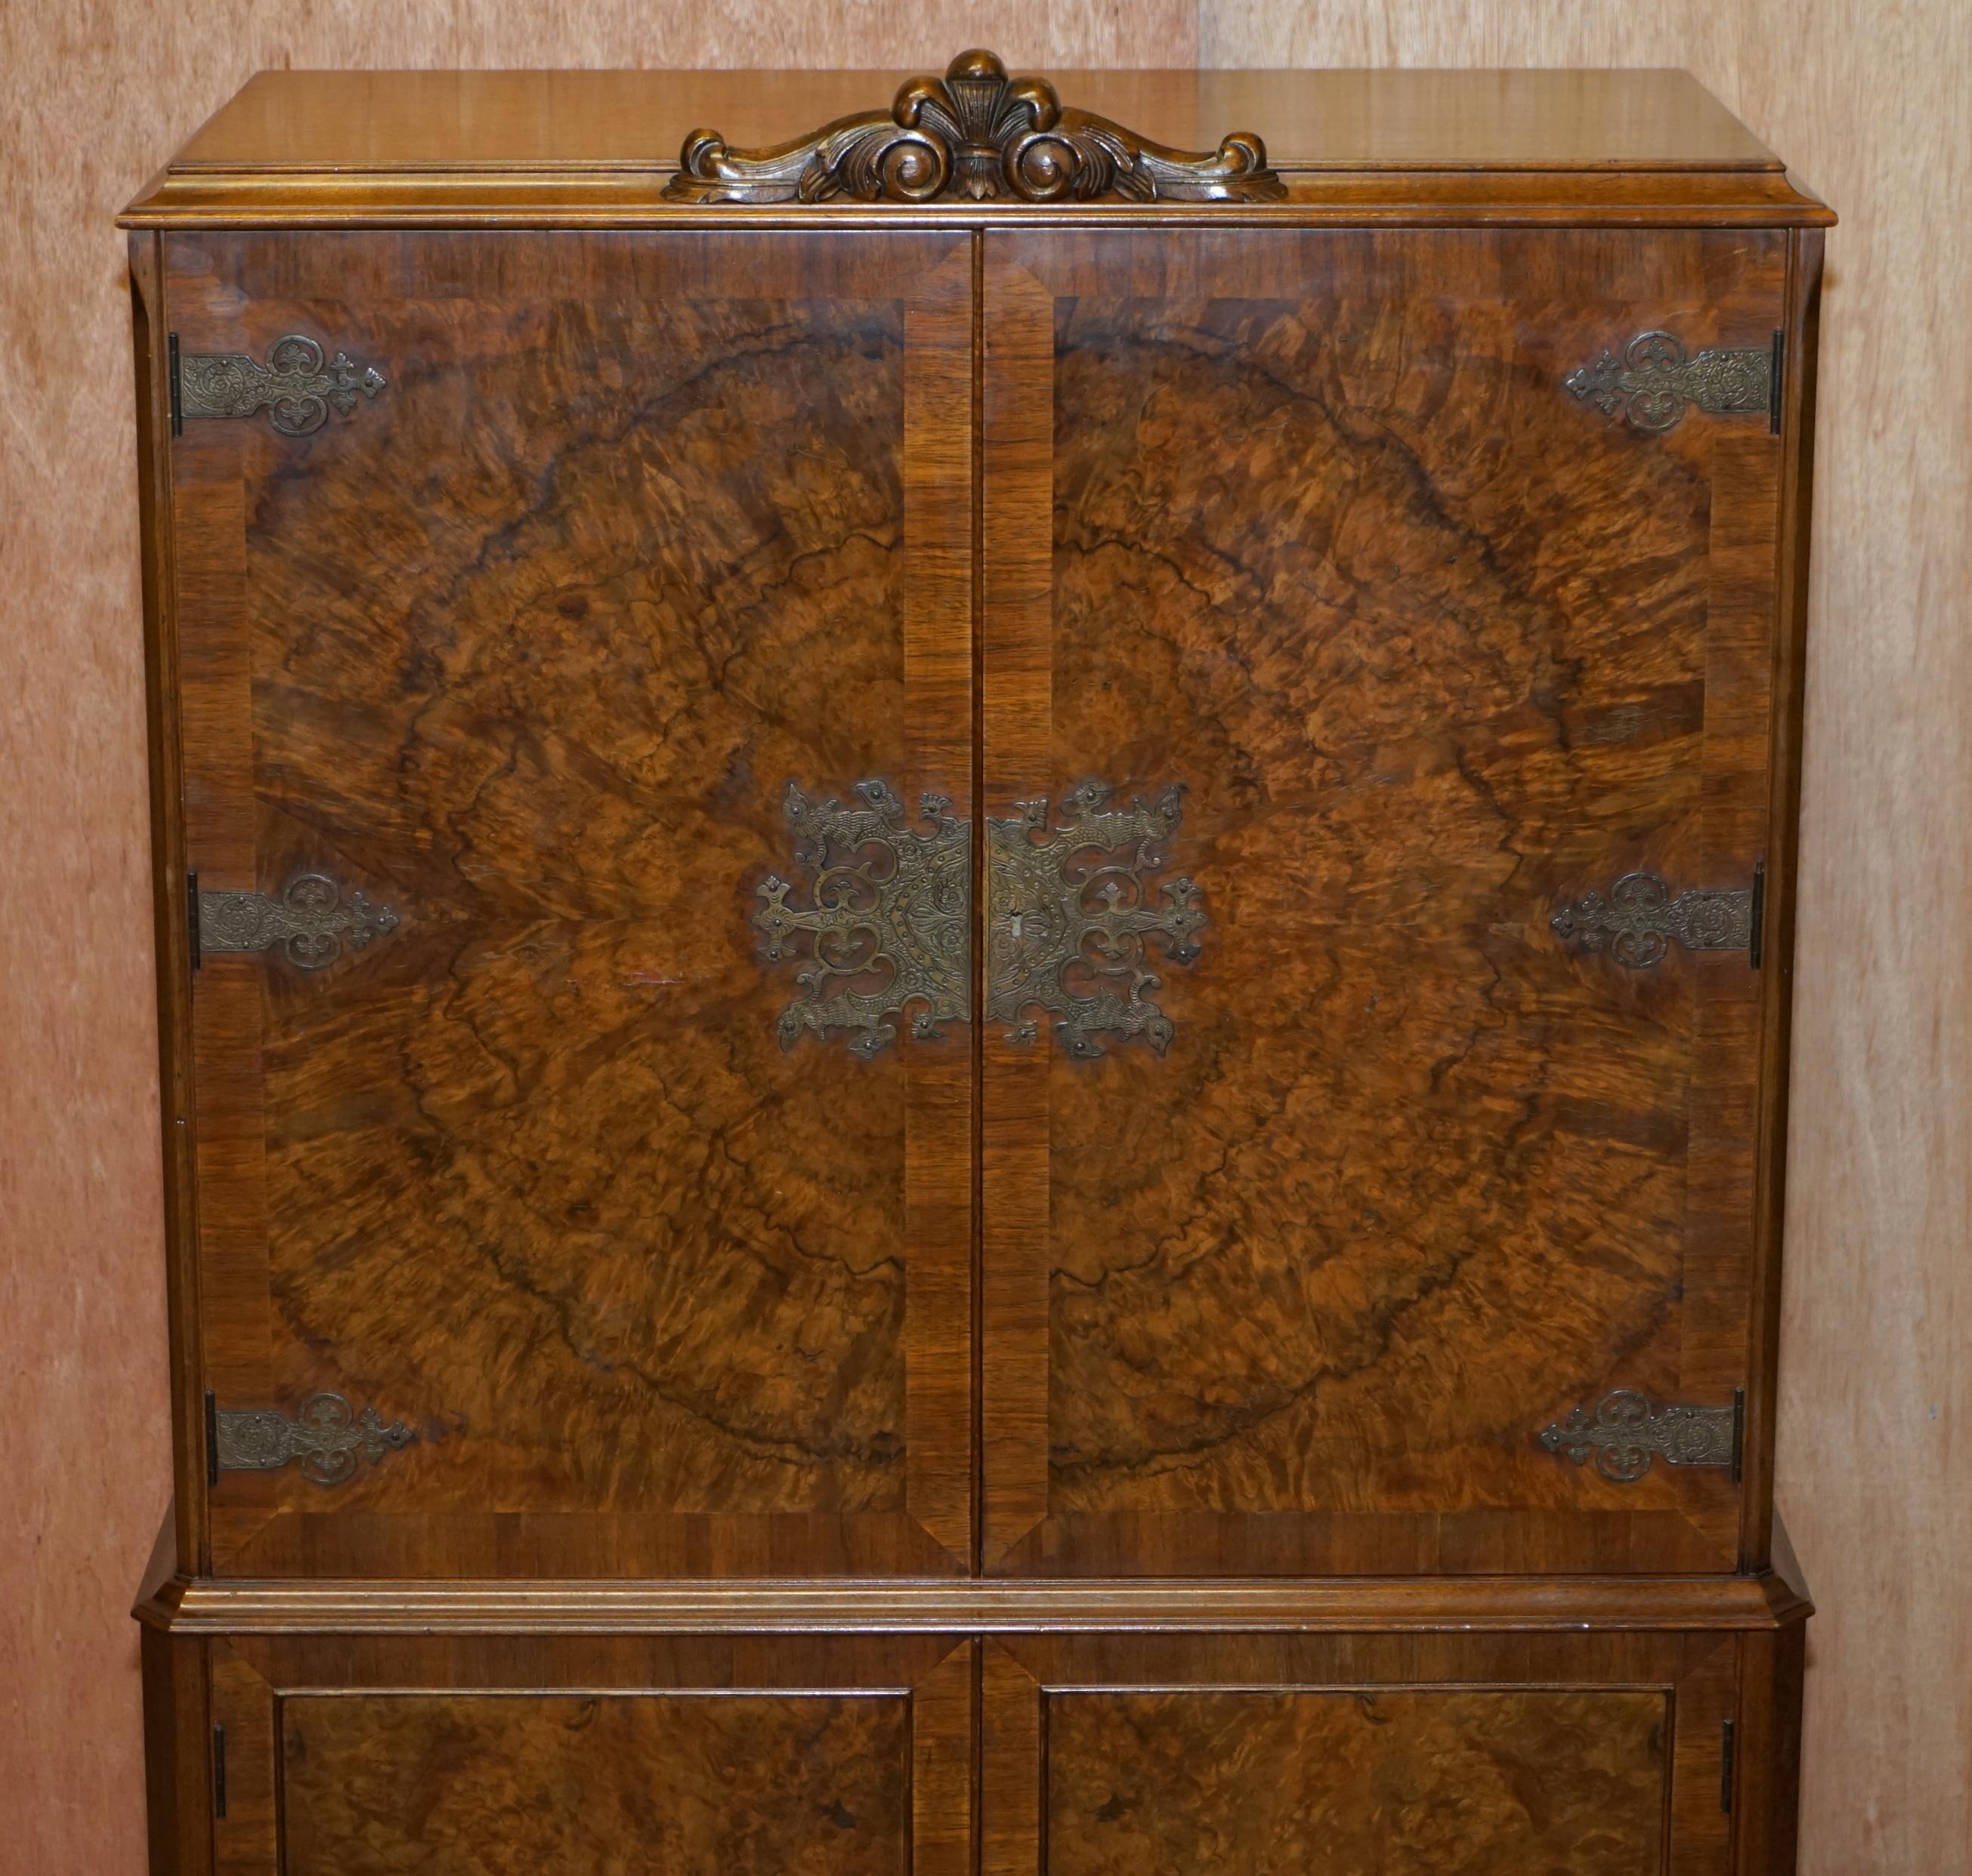 English Sublime Art Deco Drinks Cabinet with Exquisite Burr Walnut Panels Cabriole Legs For Sale